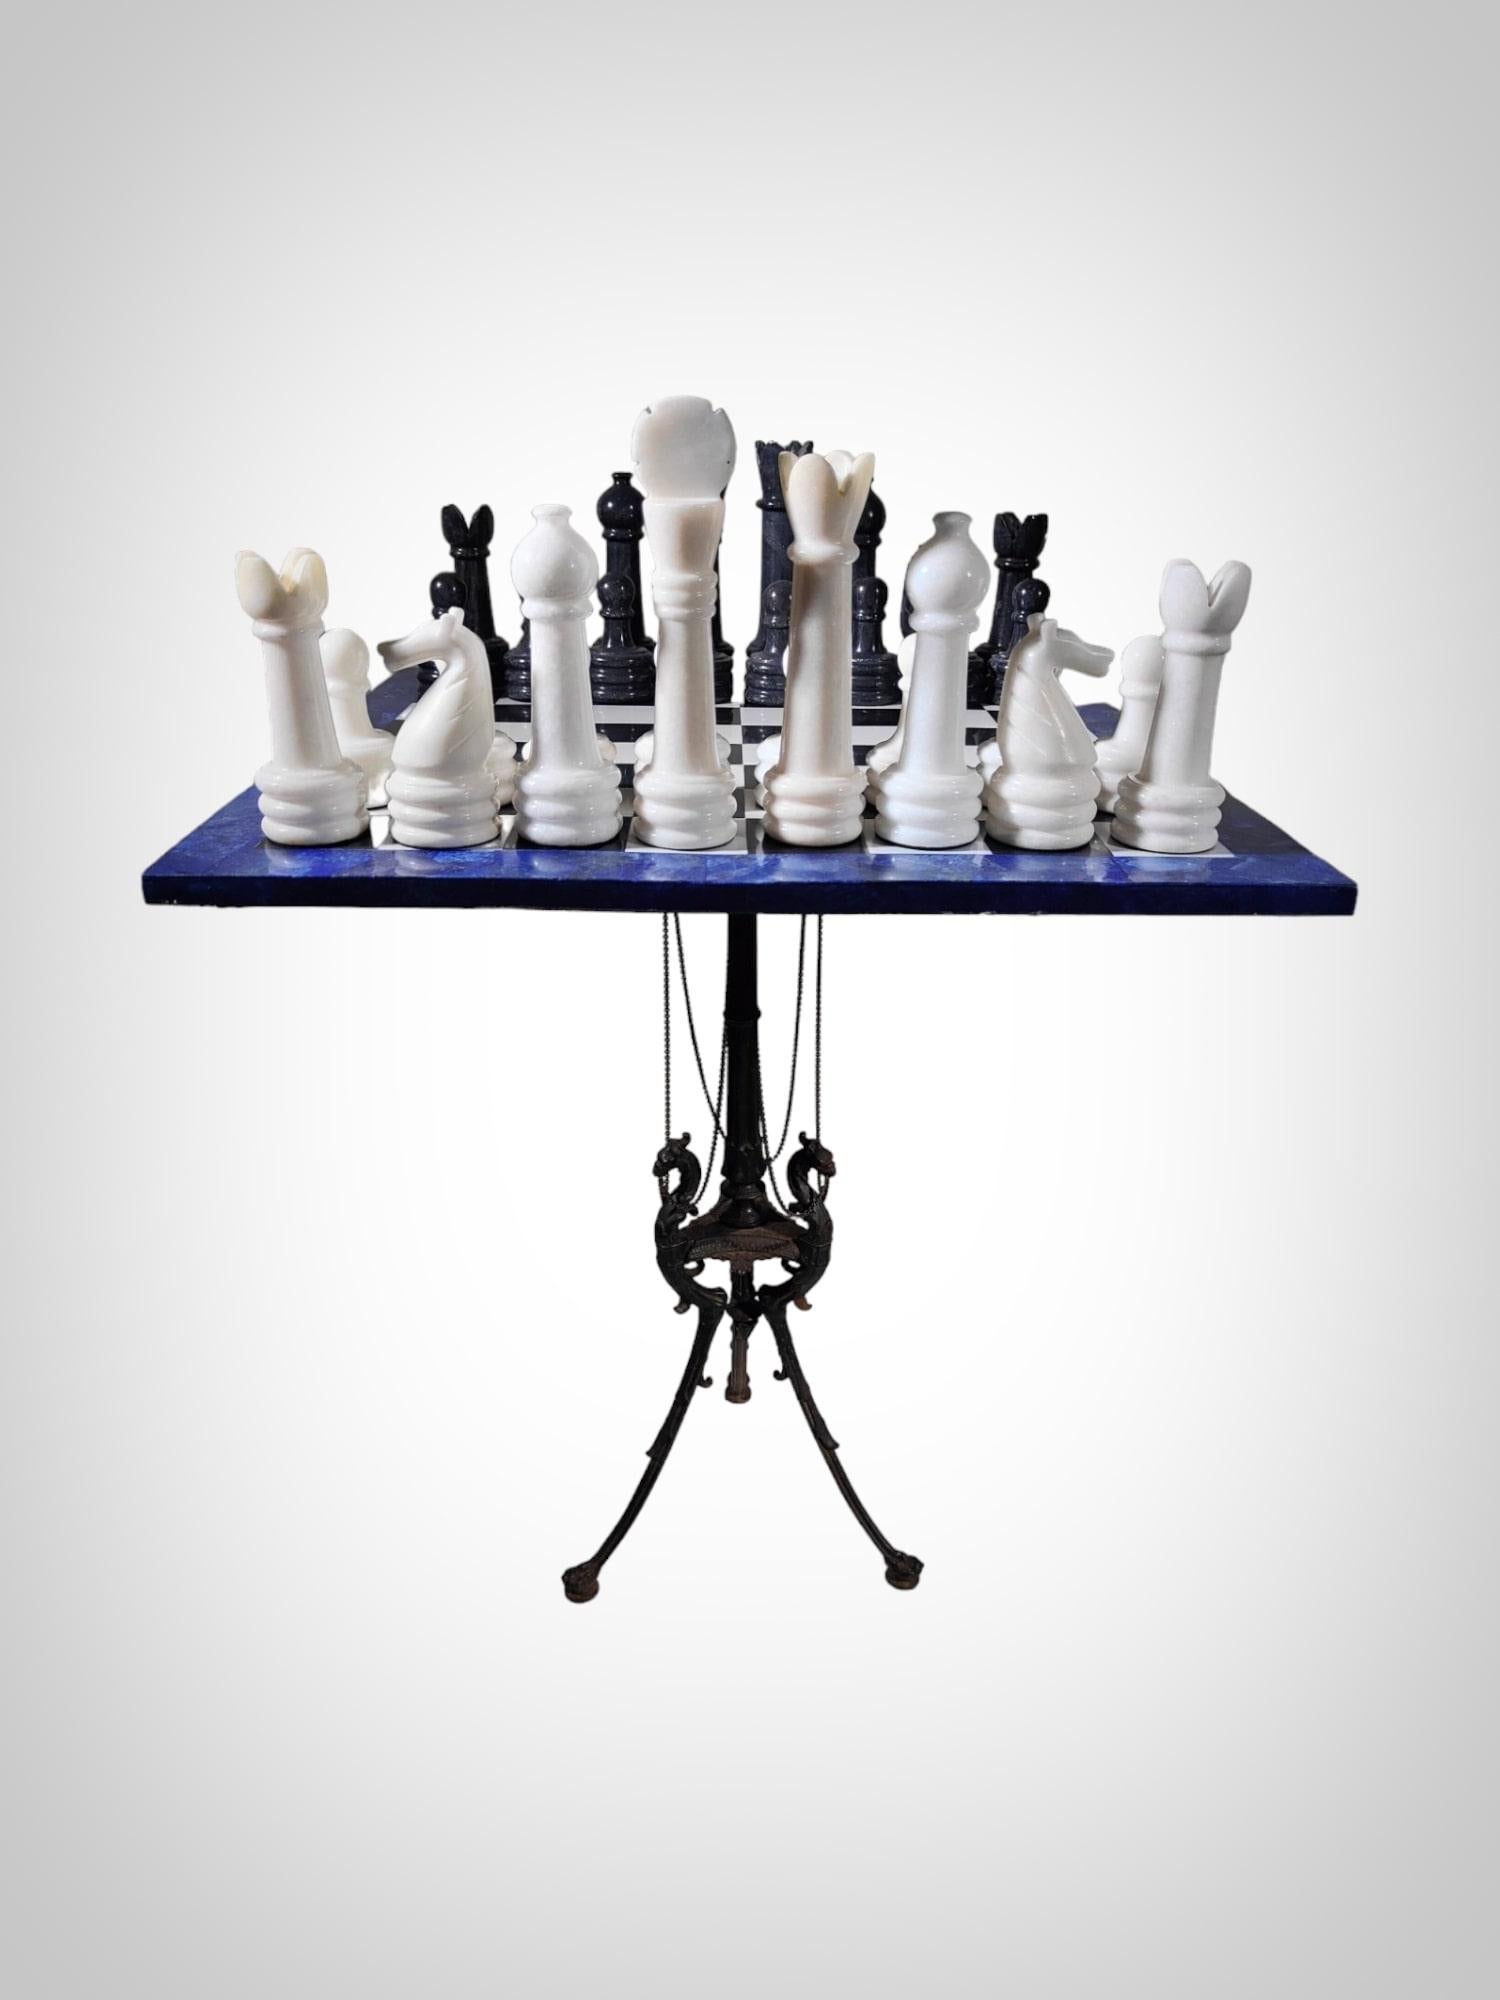 Italian Chess Table from the 1950s - Lapis Lazuli, Marble, and Dragon-Shaped  For Sale 1